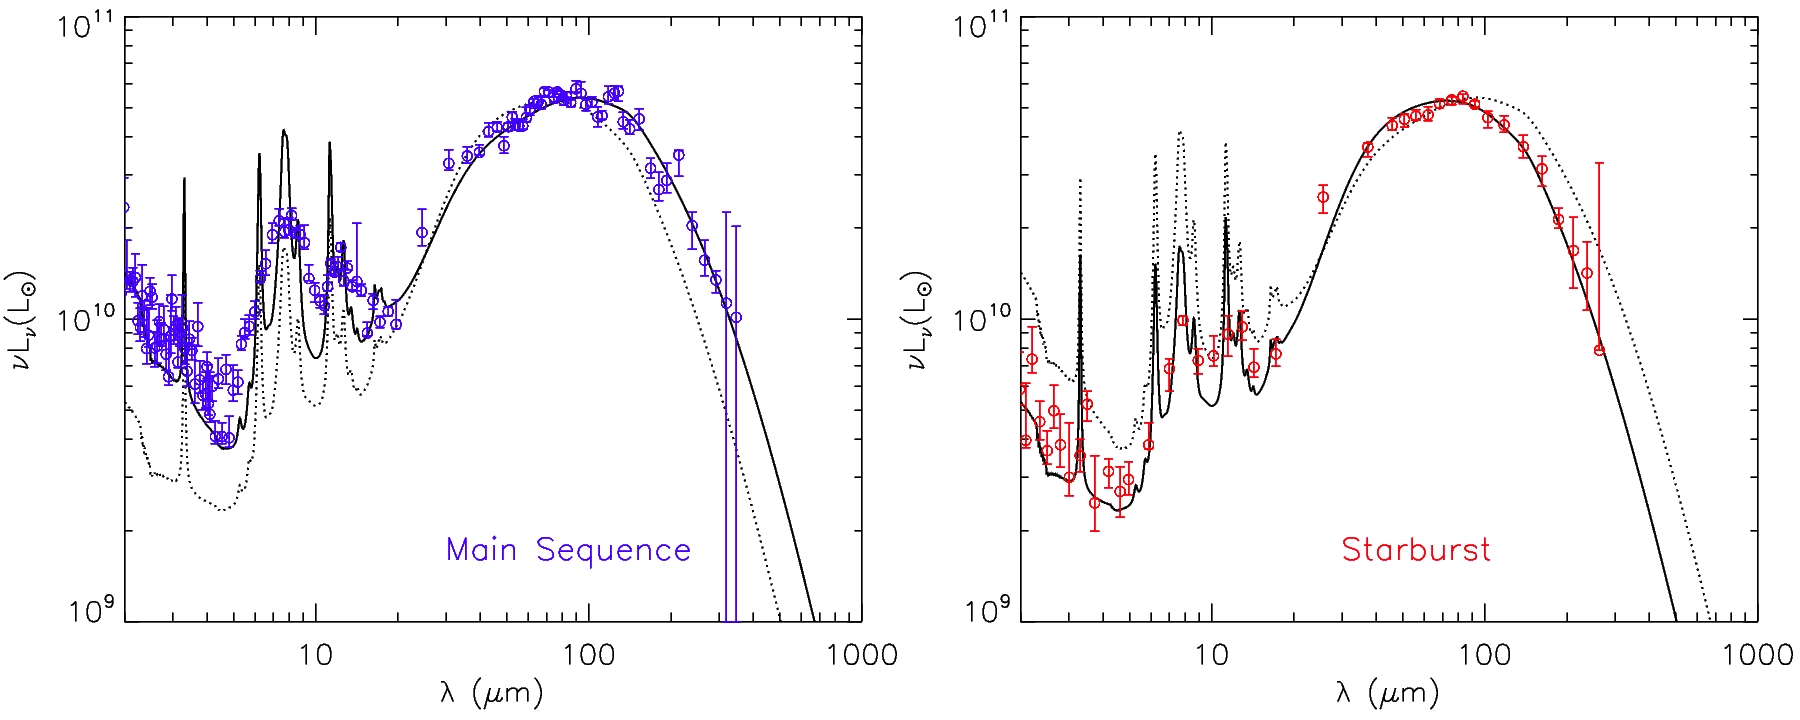 SEDs for 'main-sequence' and star-burst galaxies